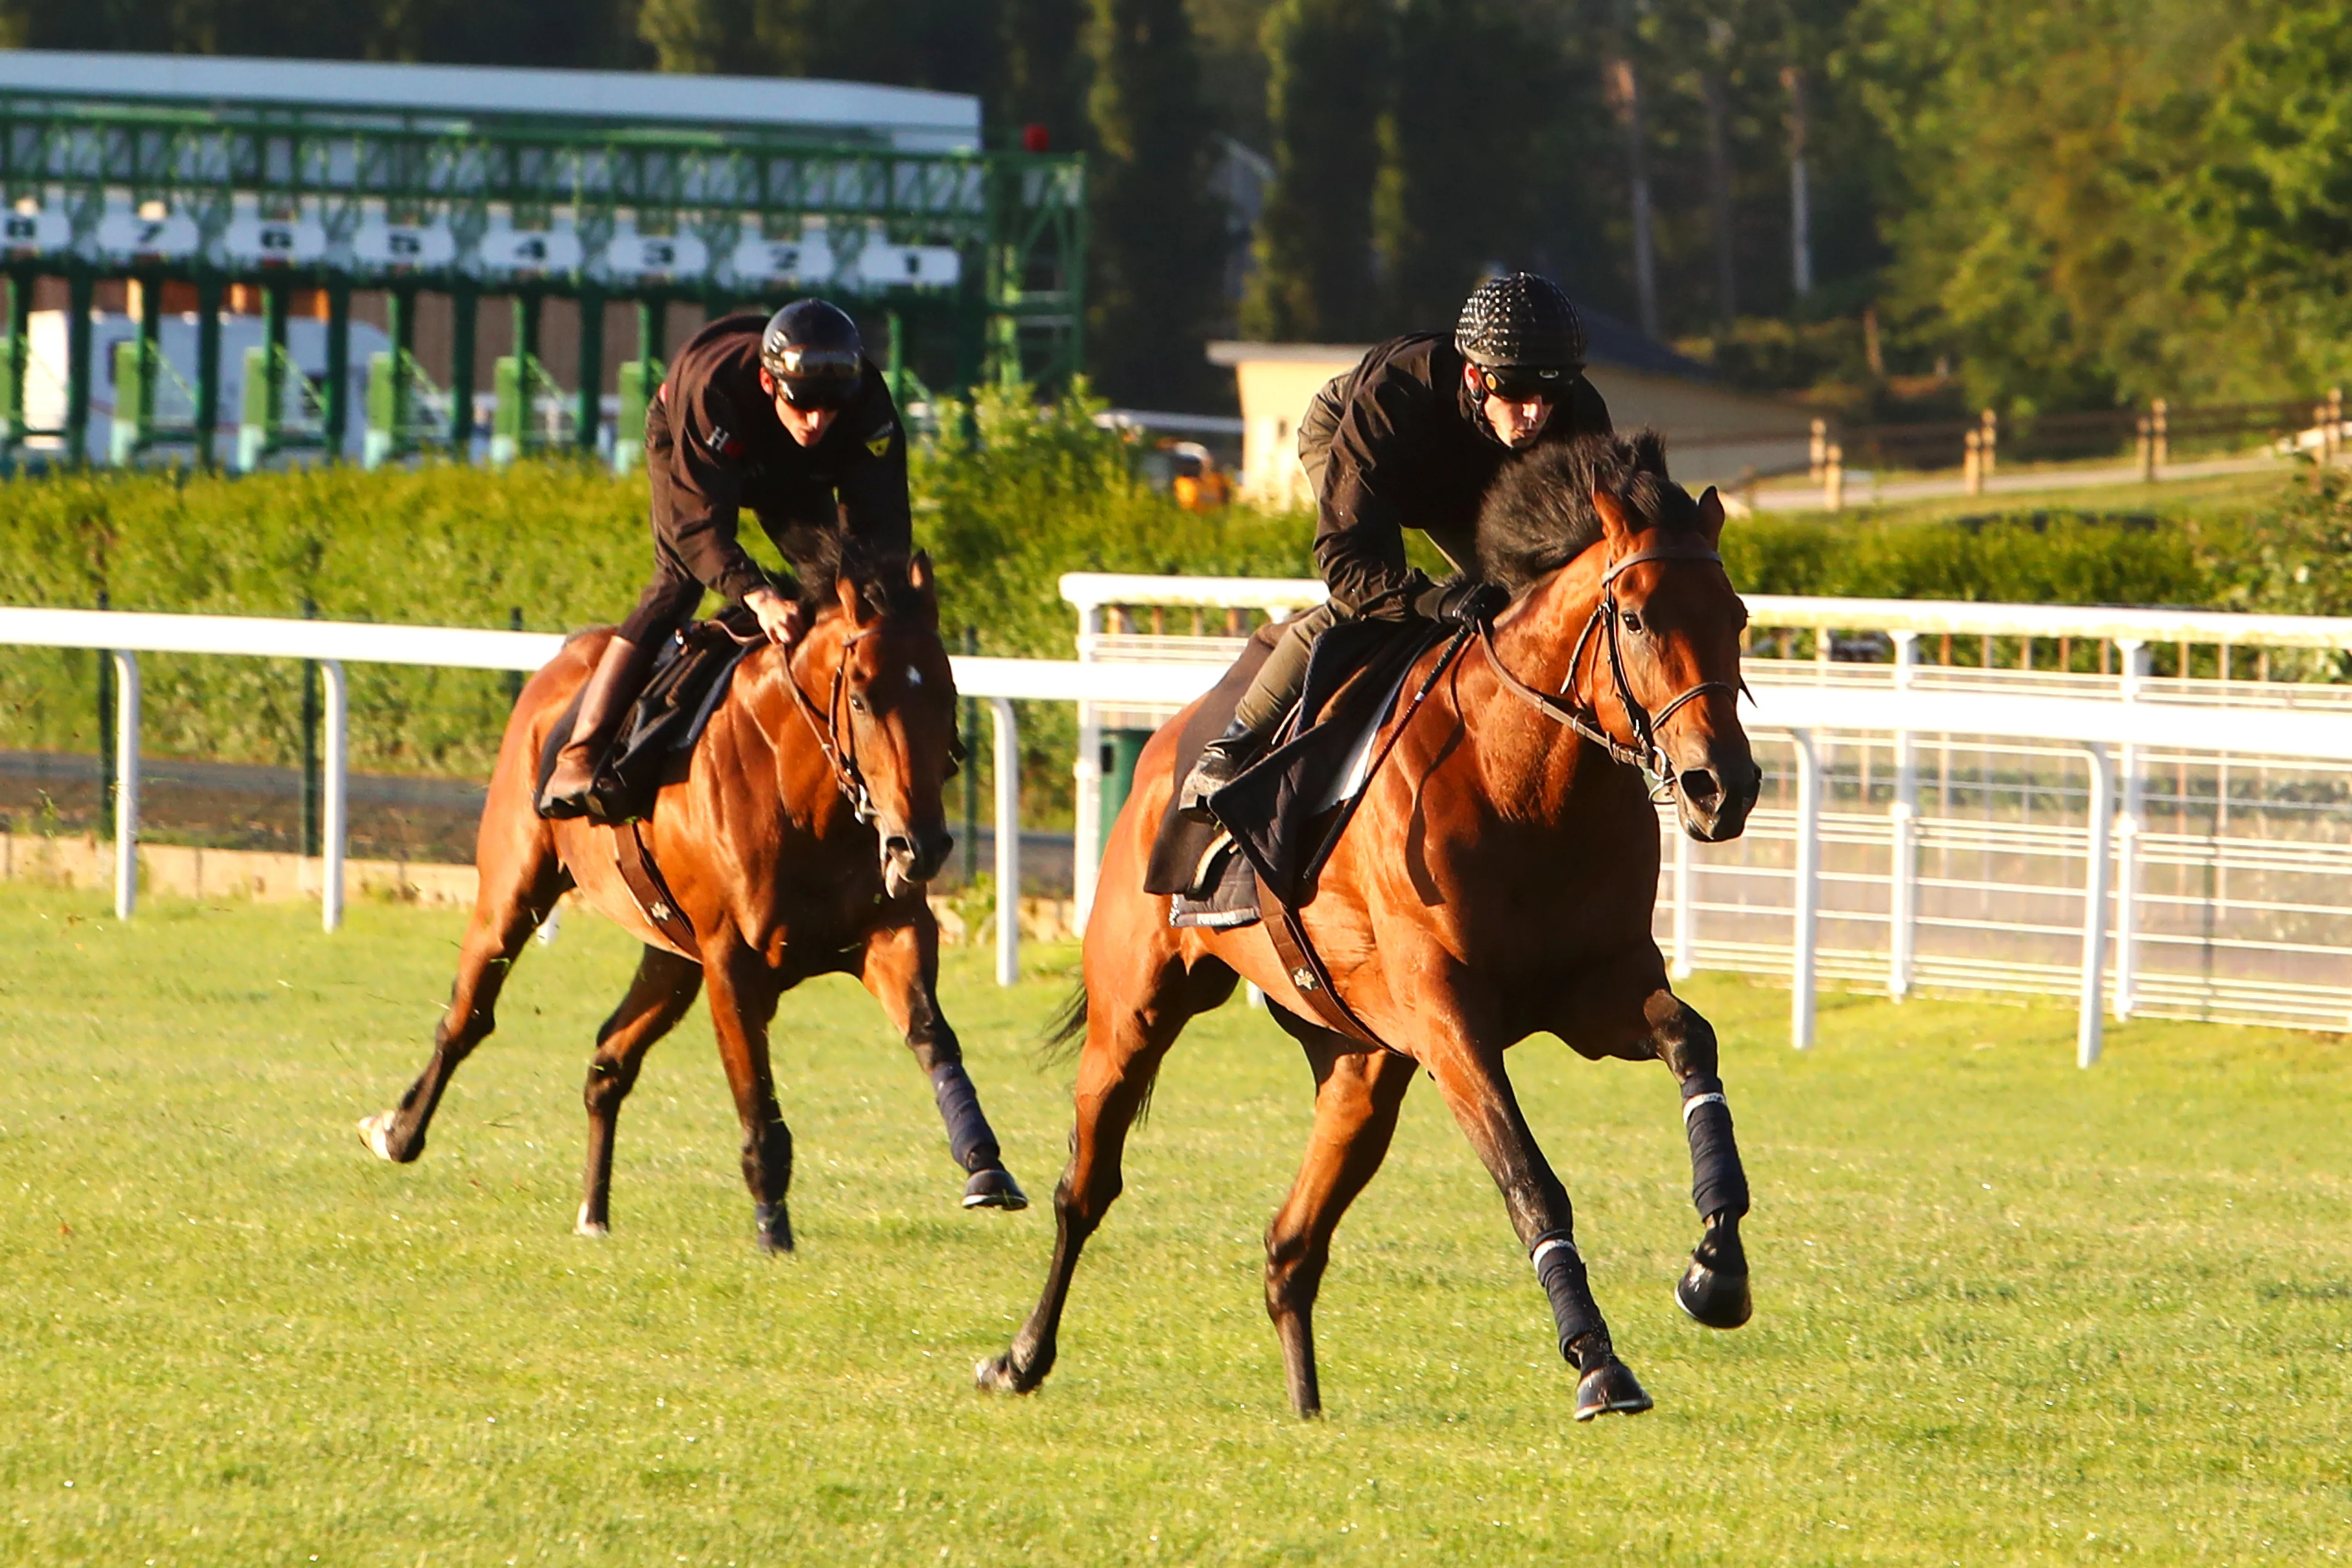 Deauville-La Touques Racecourse in France, Europe | Racing,Horseback Riding - Rated 6.6